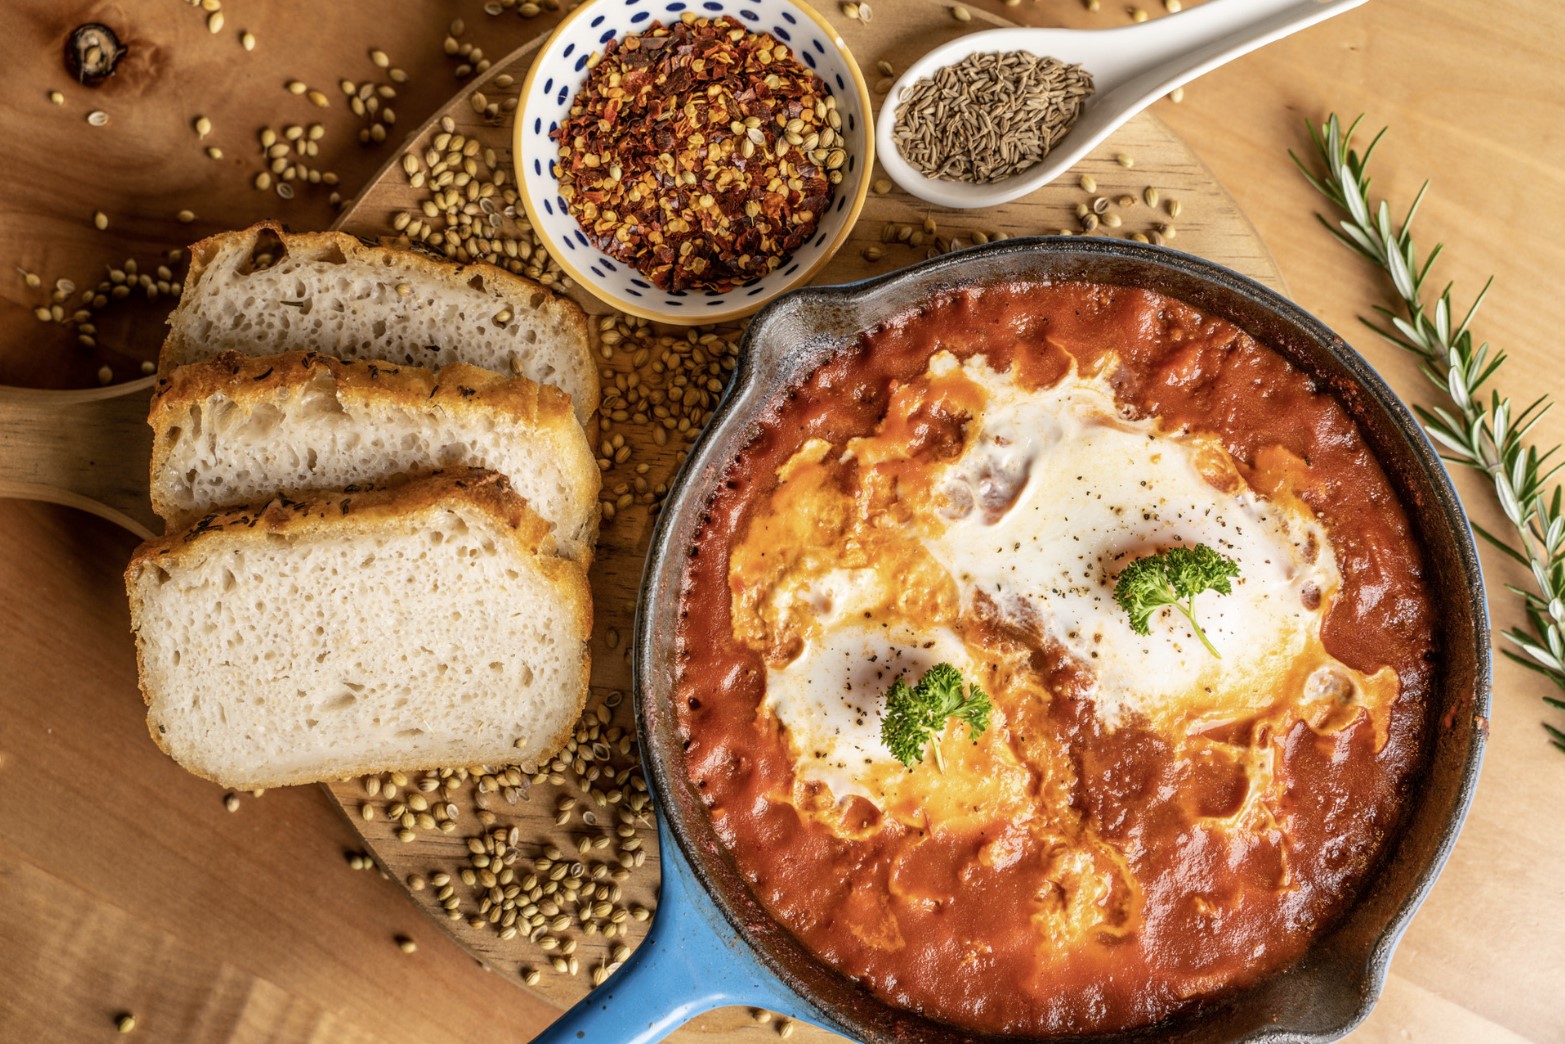 Zero360 food photography example with a pasta dish and bread slices.